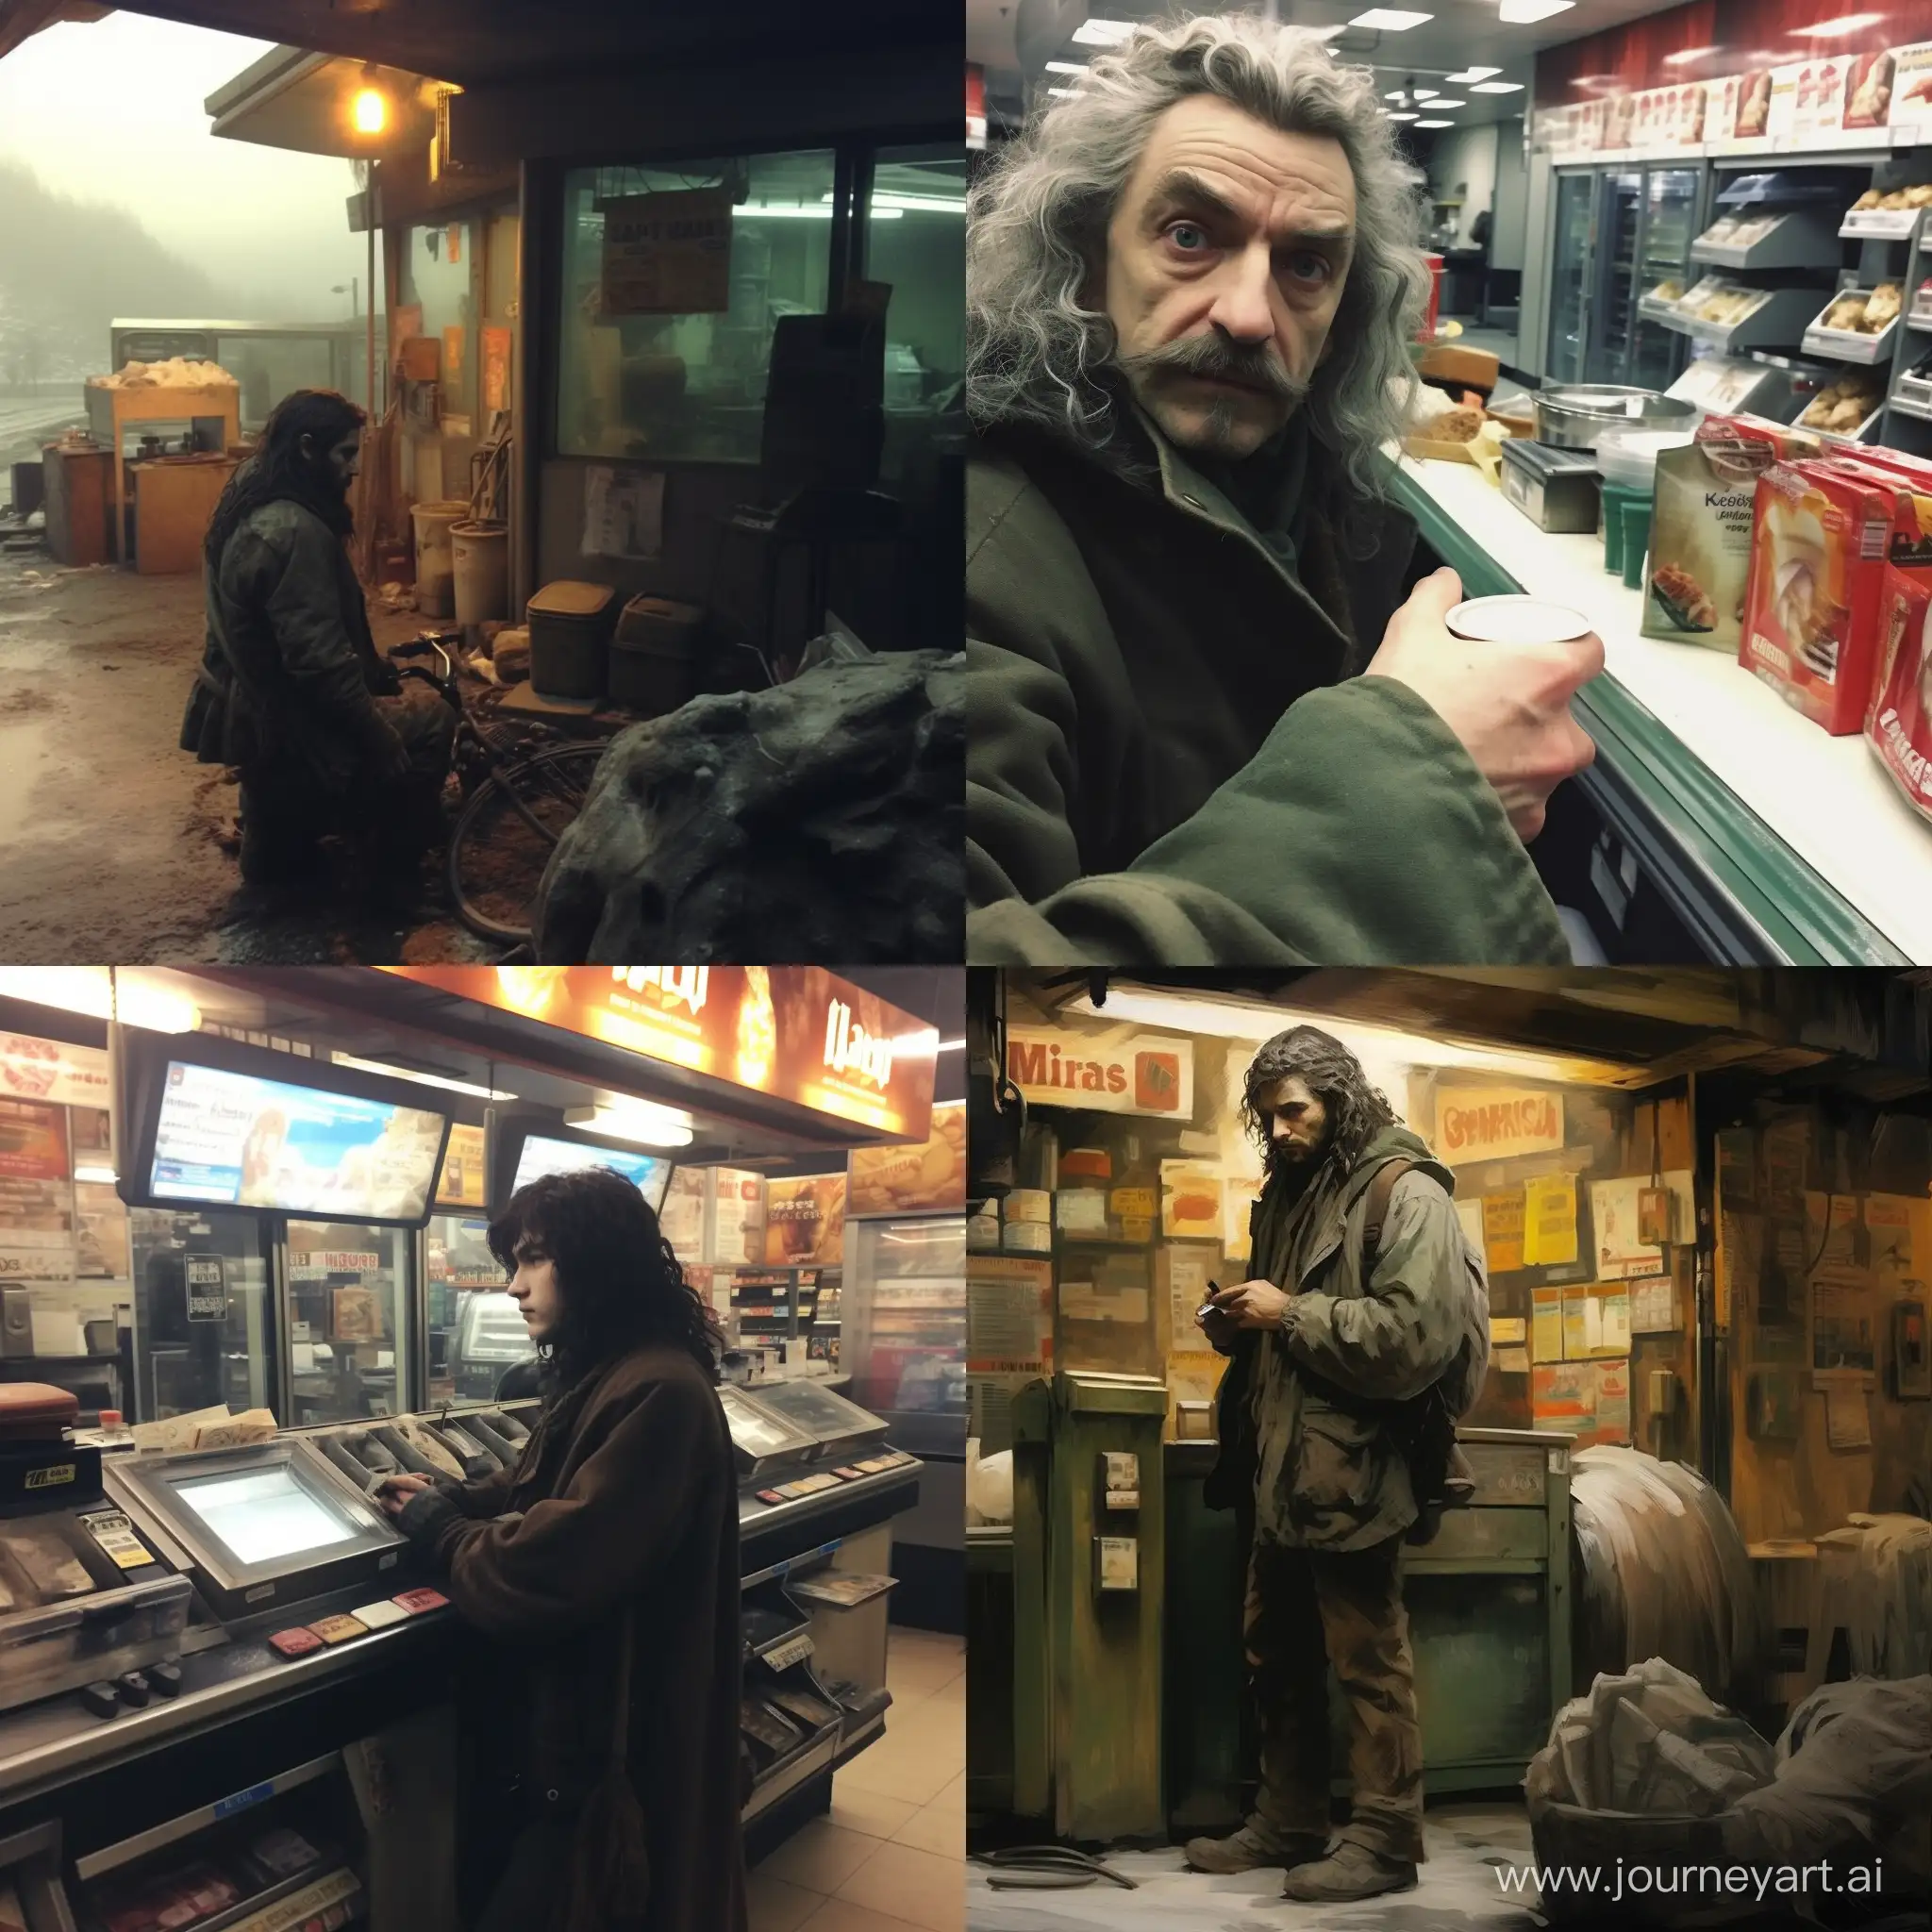 Hobbit-Discovers-Mysterious-Ring-at-Gas-Station-Surveillance-Footage